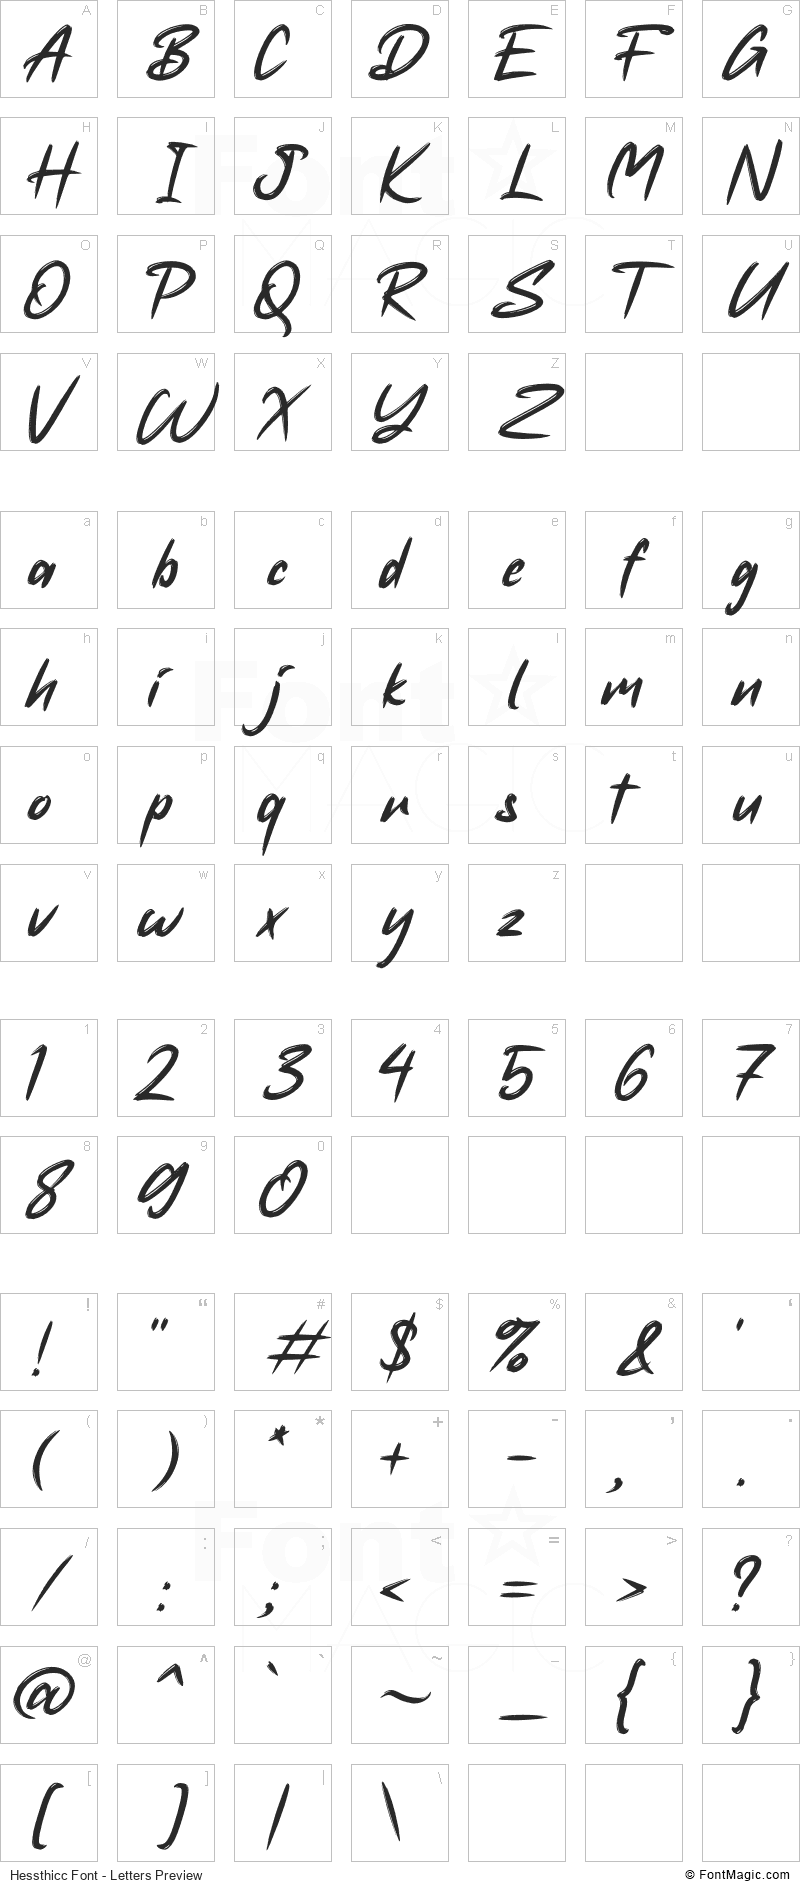 Hessthicc Font - All Latters Preview Chart